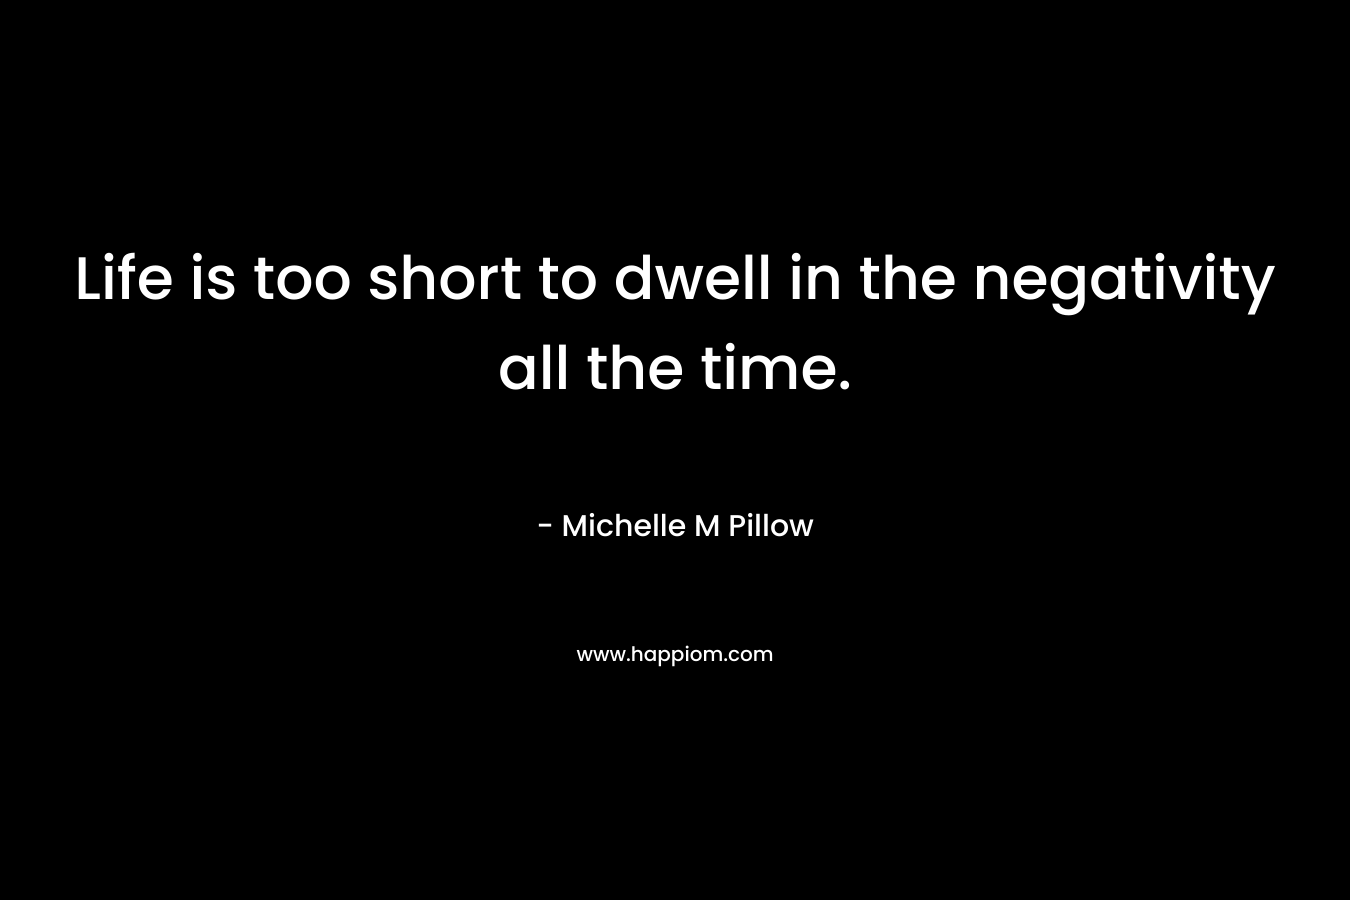 Life is too short to dwell in the negativity all the time. – Michelle M Pillow